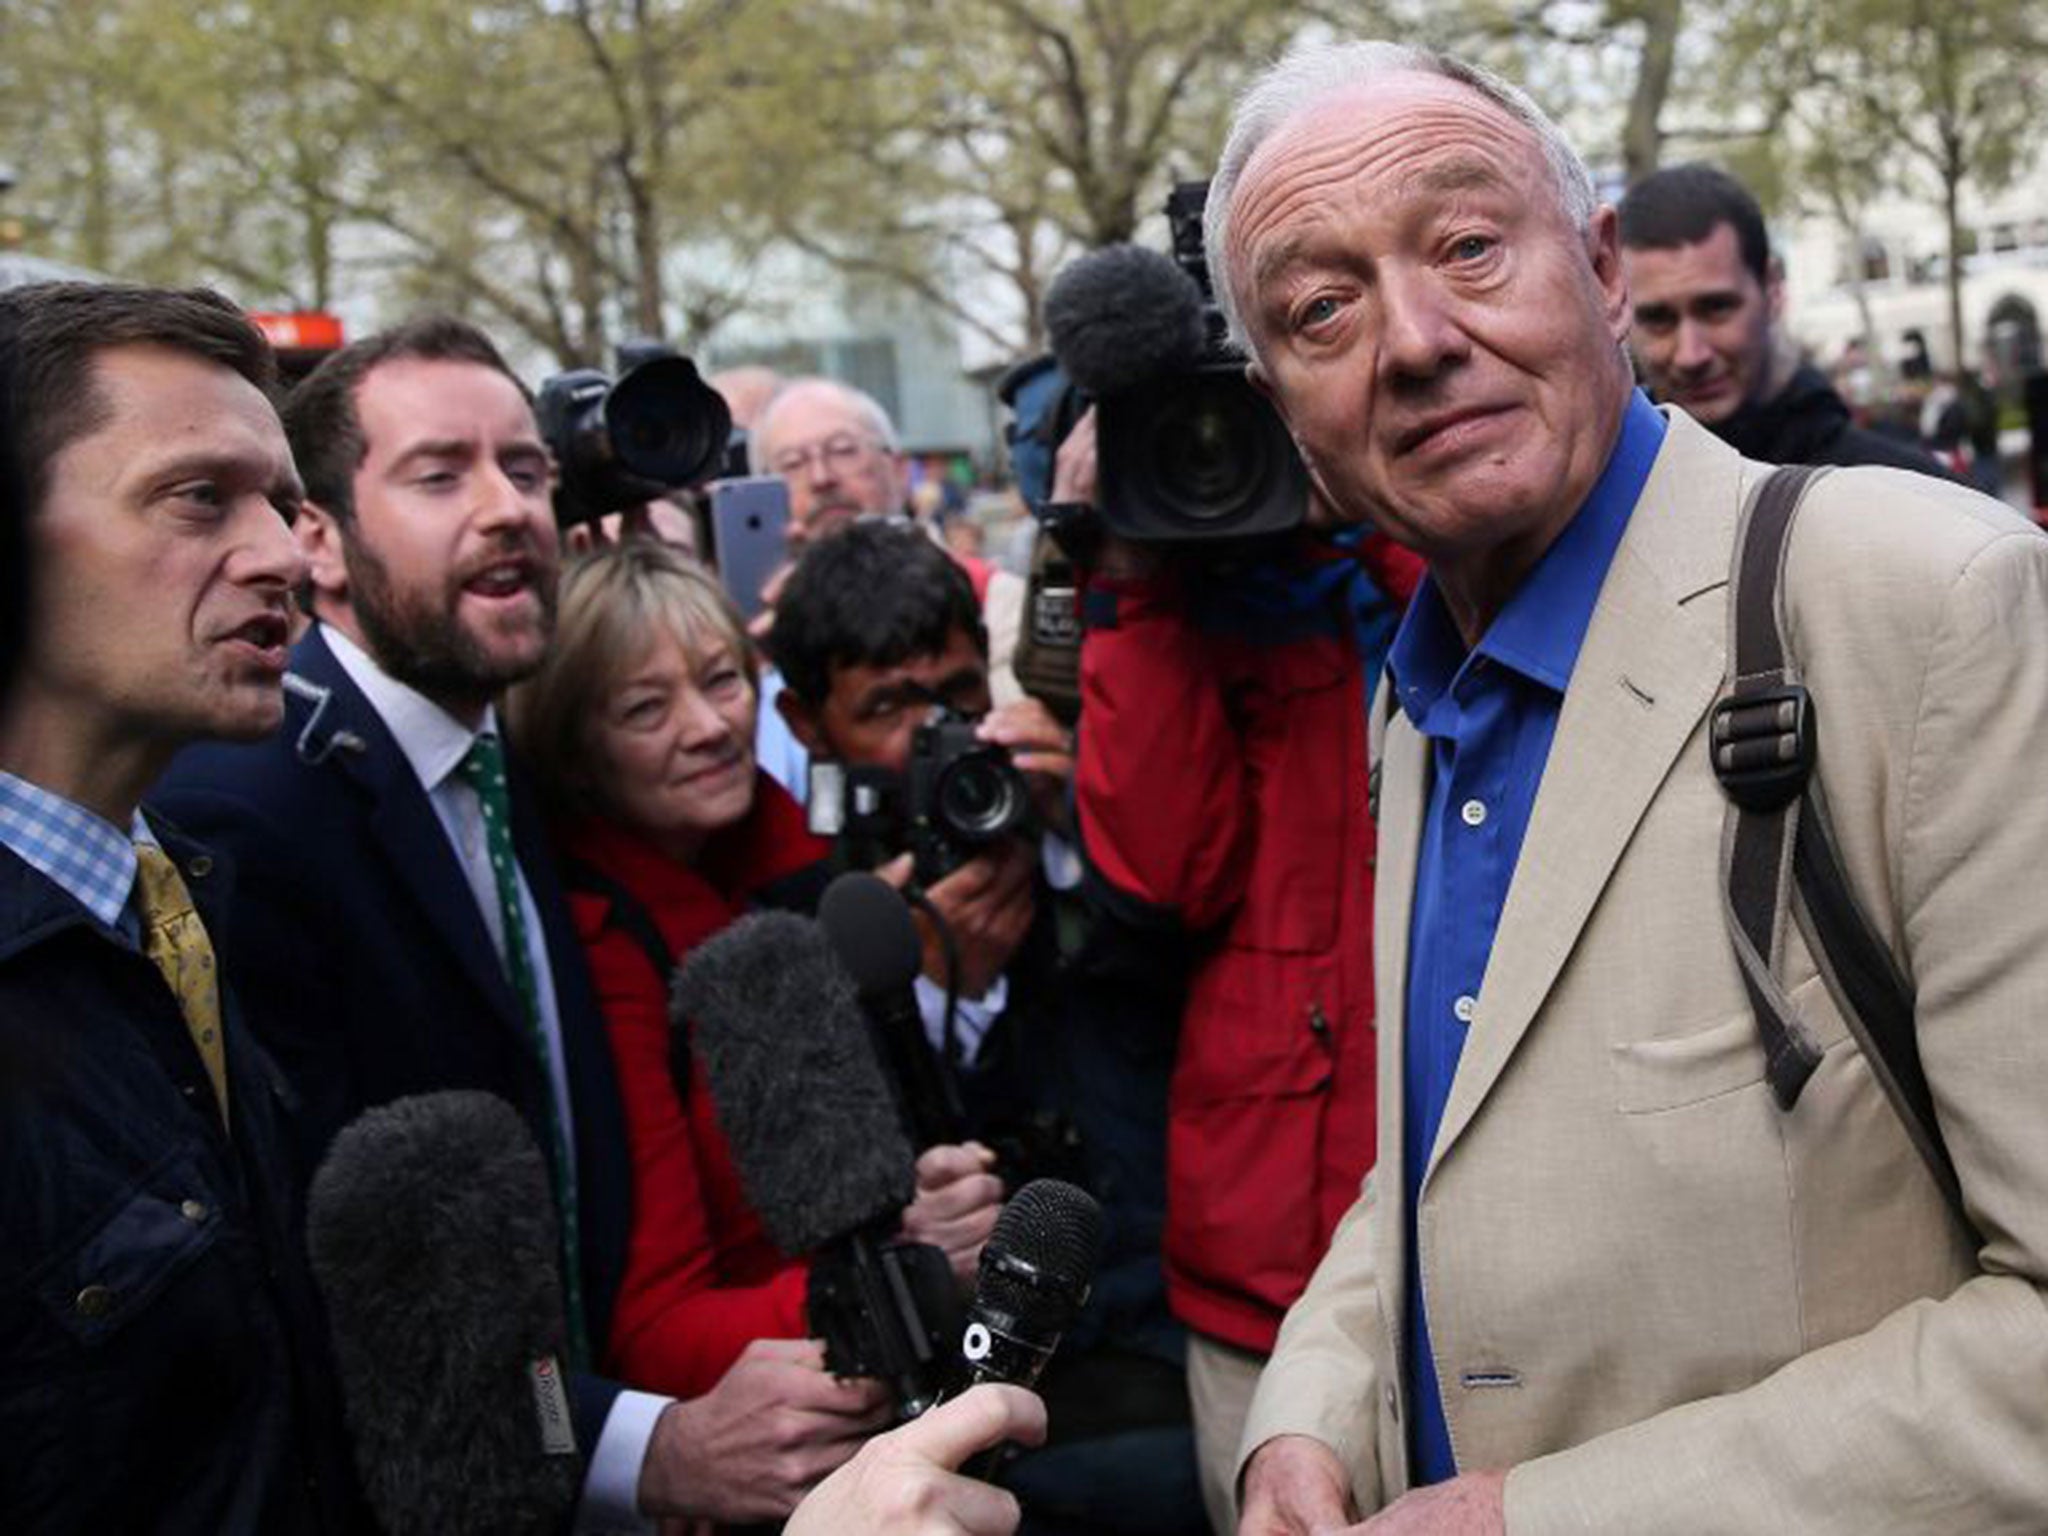 Ms Walker's suspension came a week after Ken Livingstone was suspended for saying Hitler was a Zionist